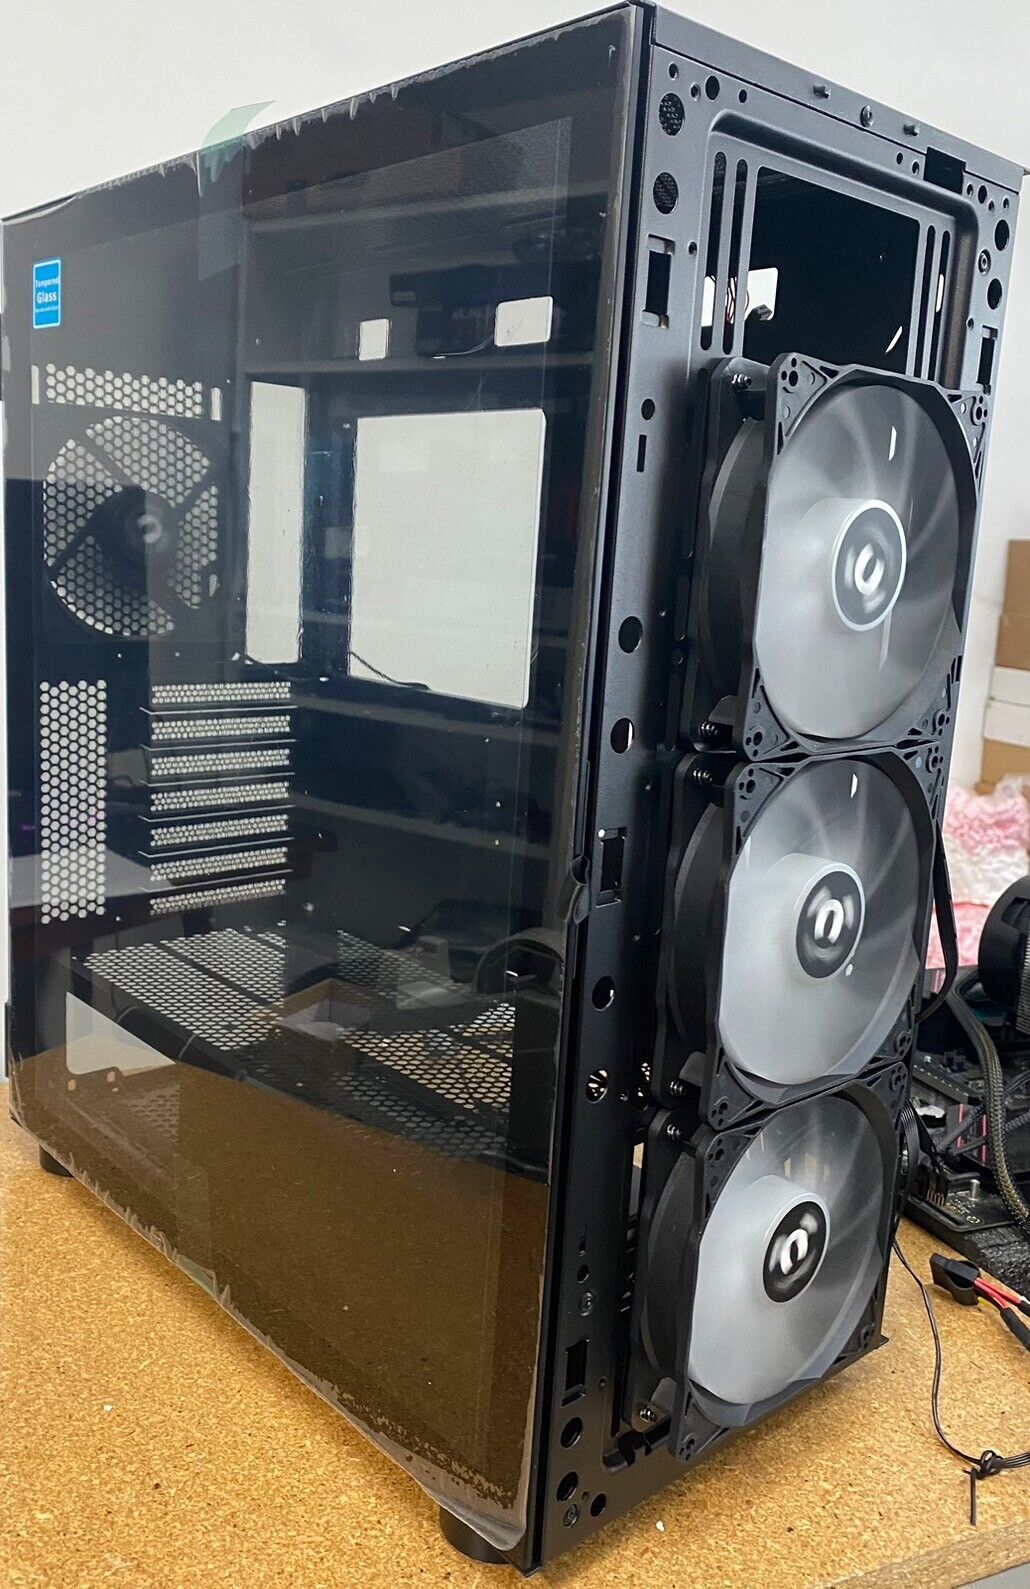 [Missing Front Panel] Thermaltake CA-1T9-00M1WN-00 H570 TG Mid Tower Chassis